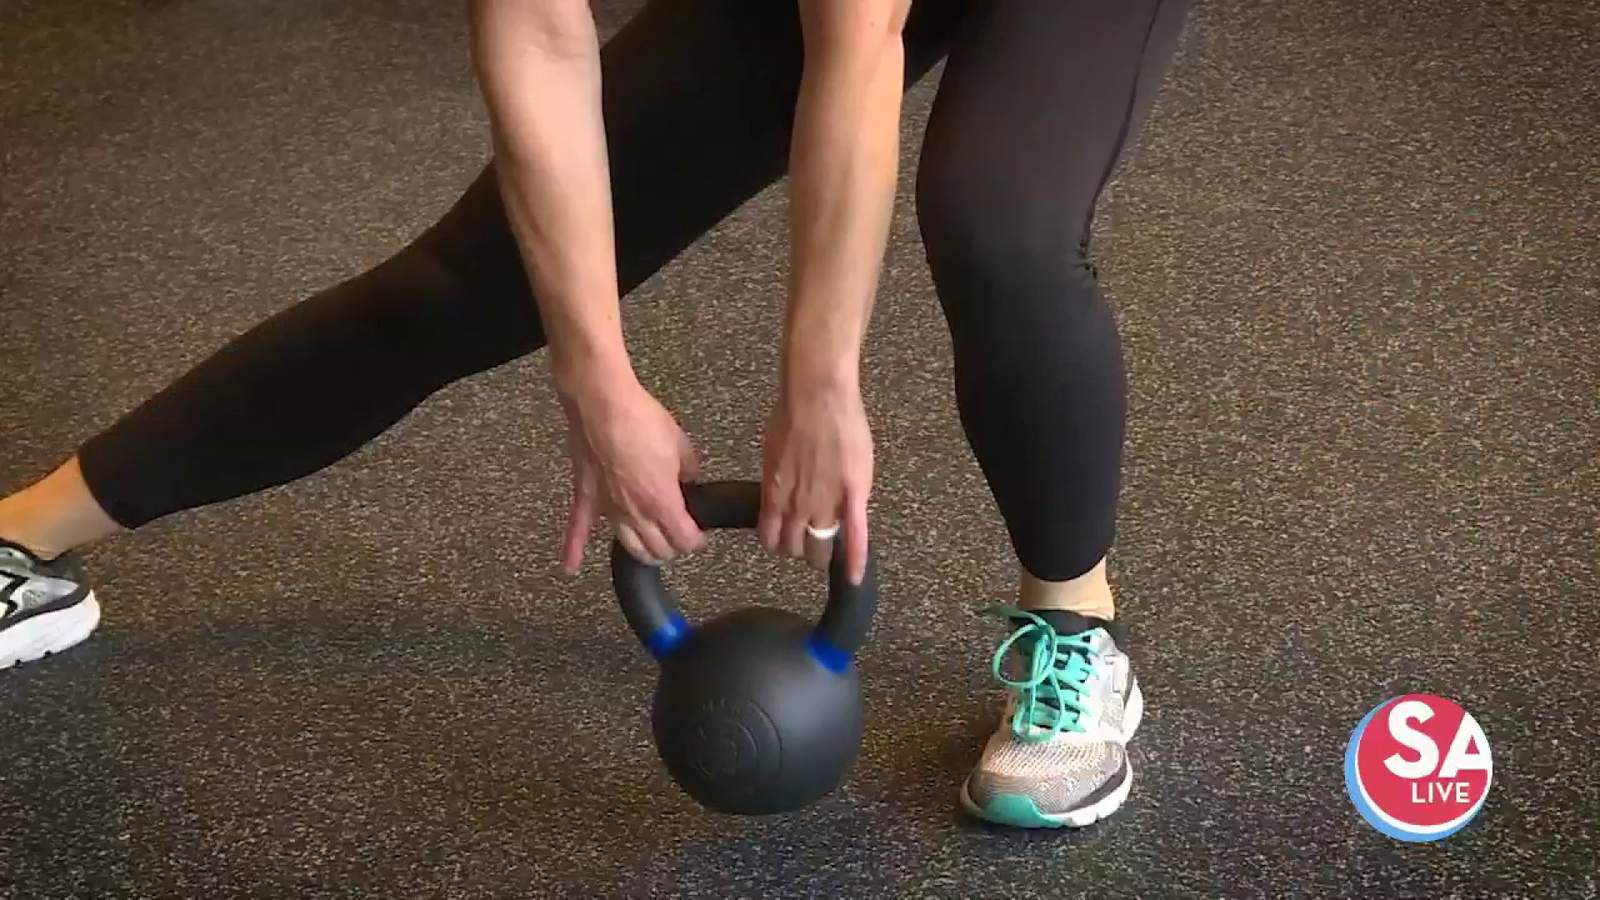 Heat up your turkey legs with this workout